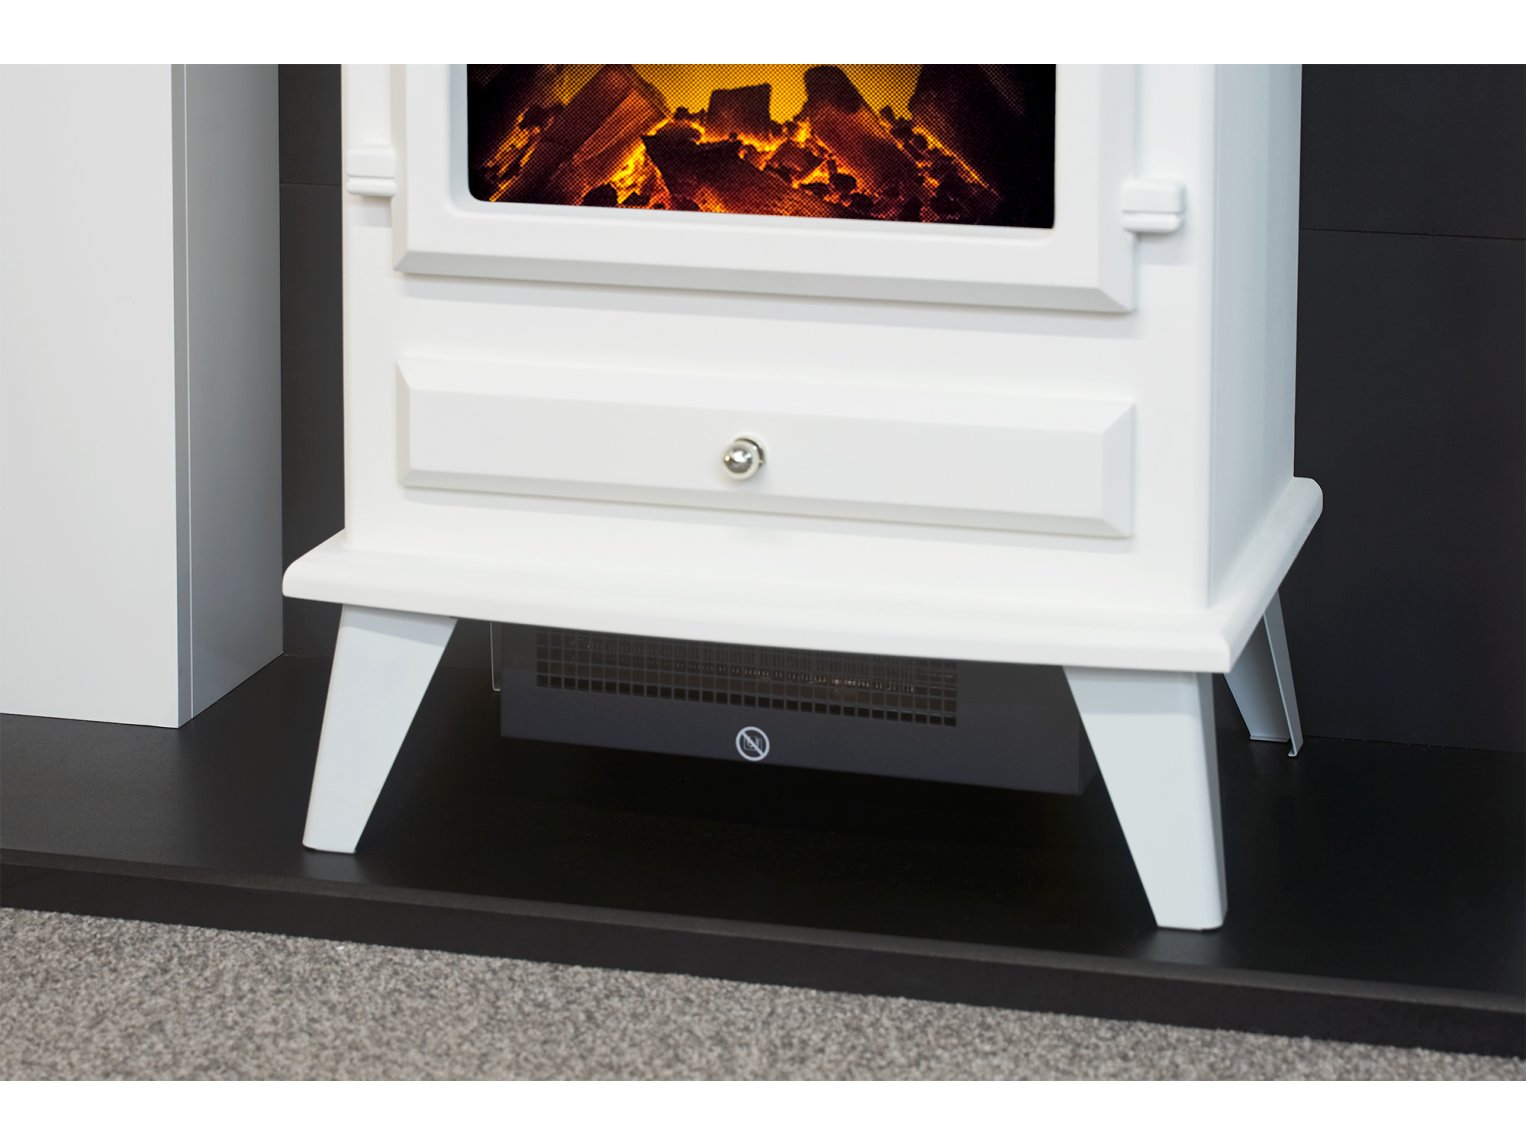 Adam Chester Fireplace Pure White + Hudson Electric Stove White, 39"